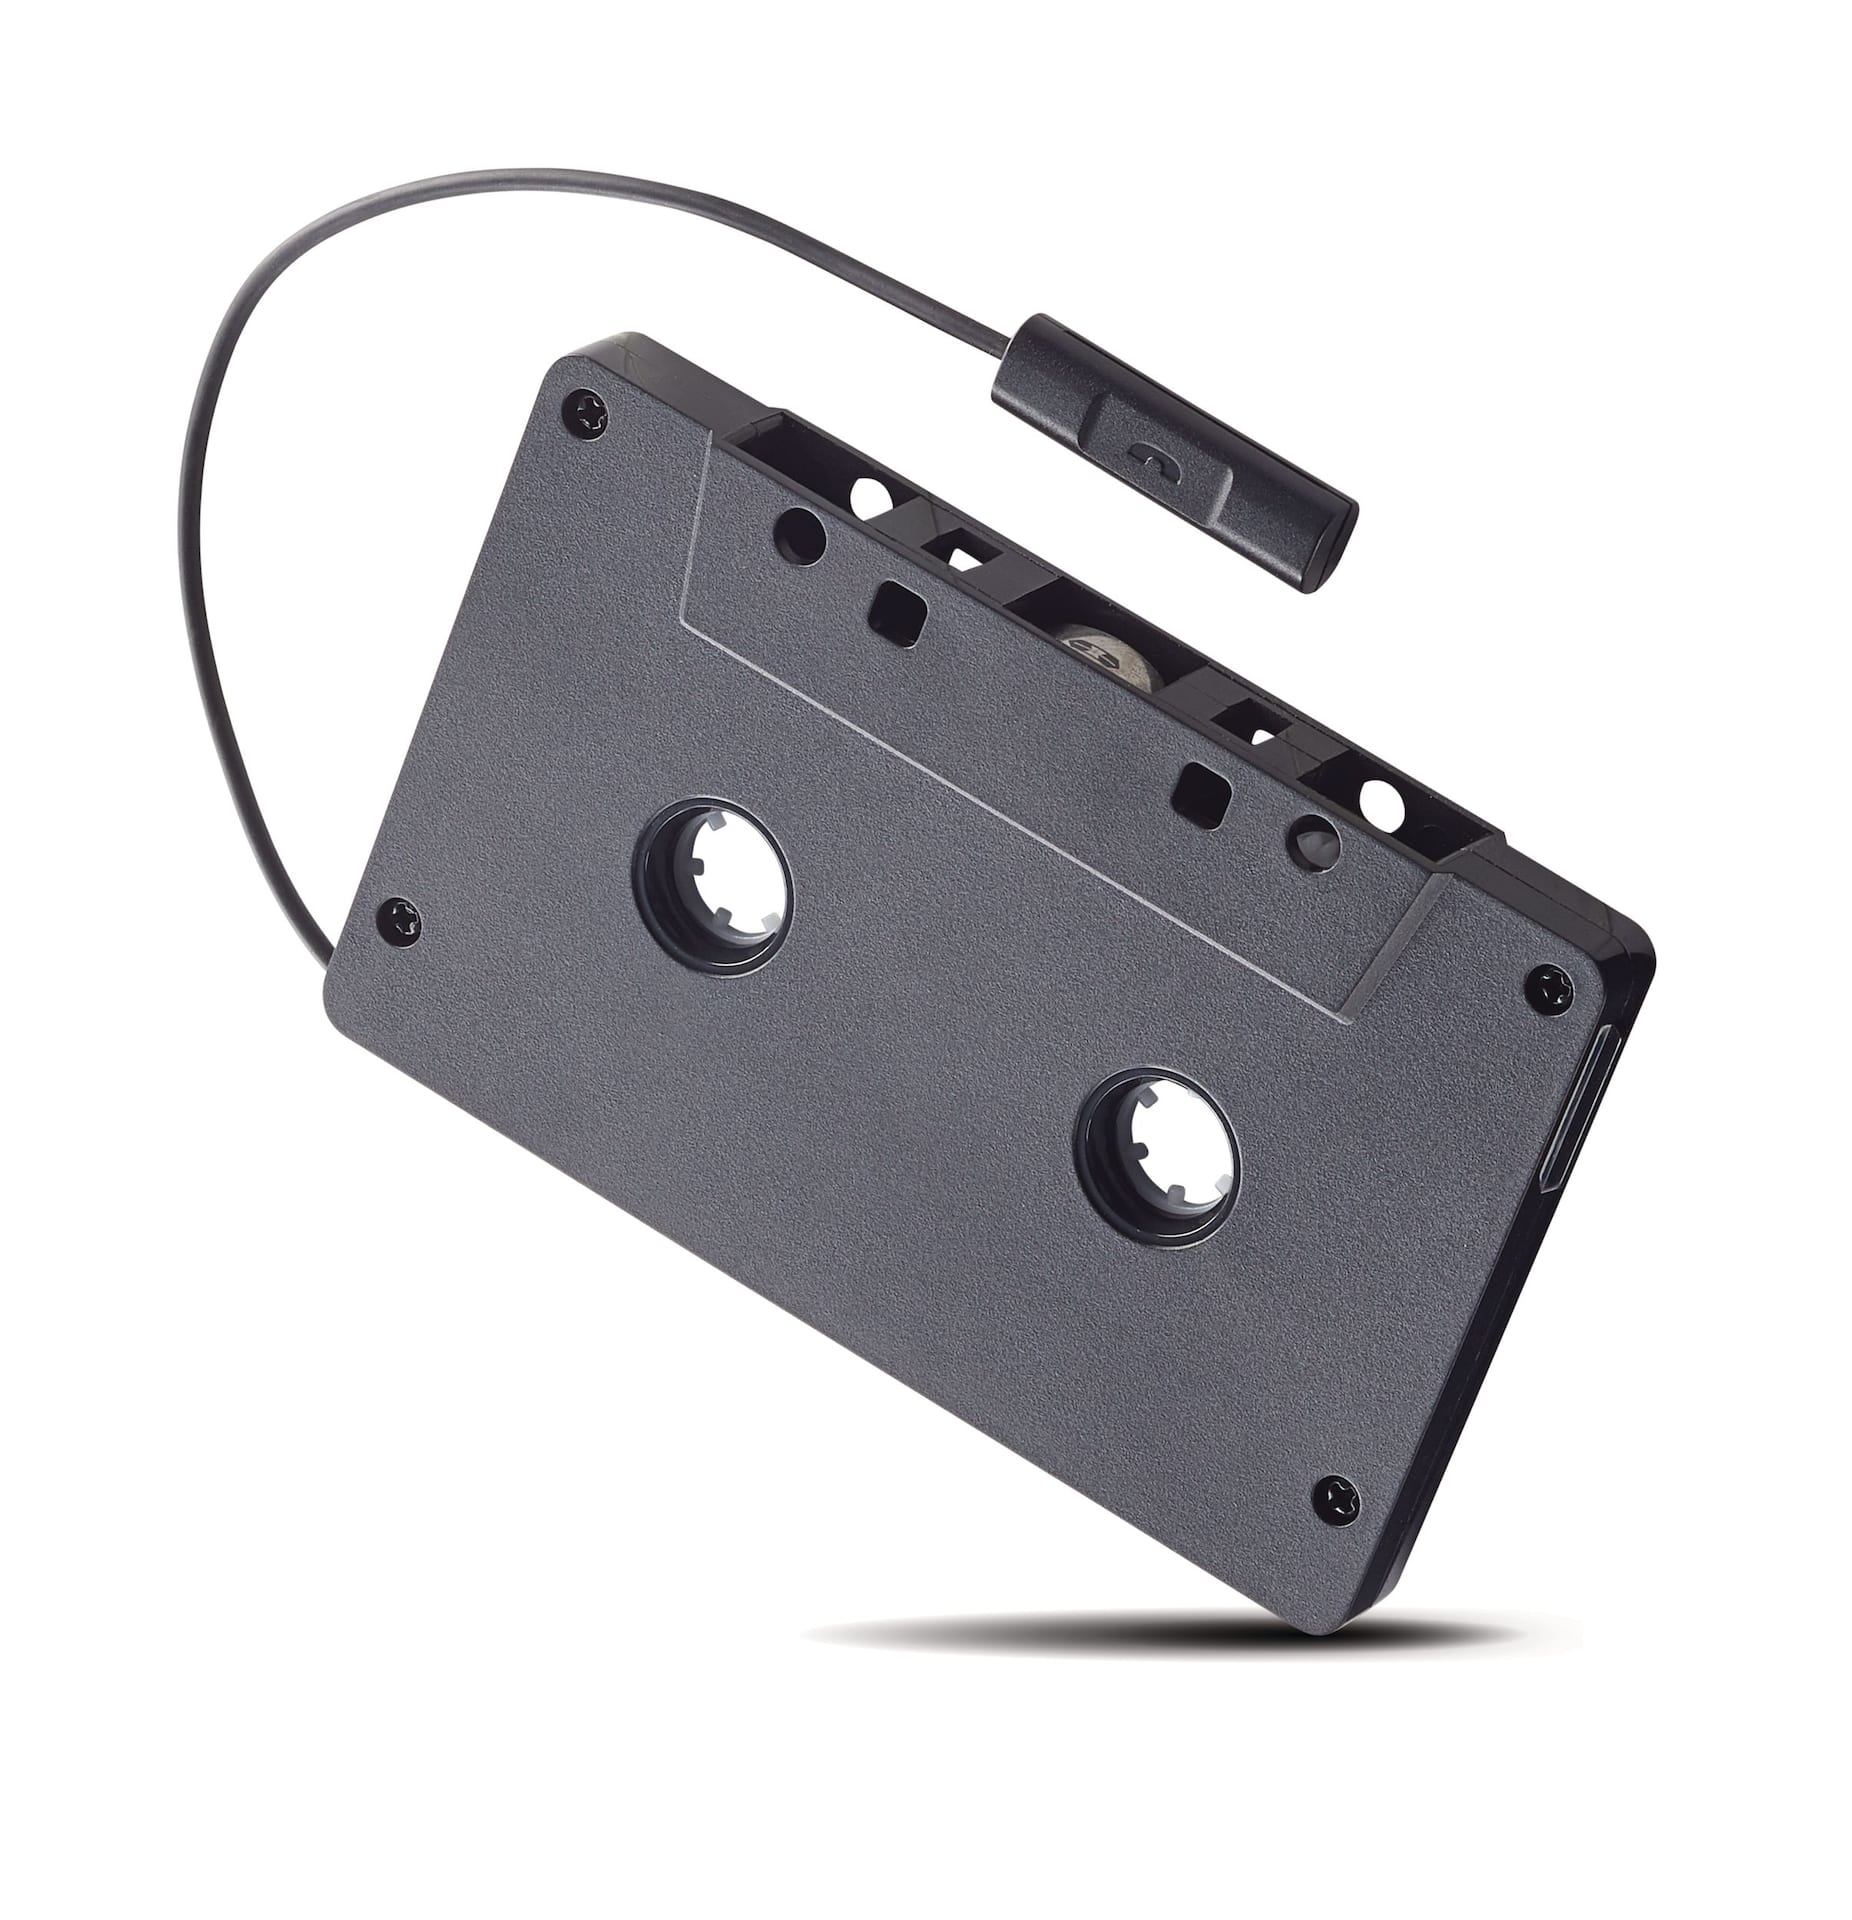 Bluehive Bluetooth Audio Cassette Adapter with Built-in Microphone